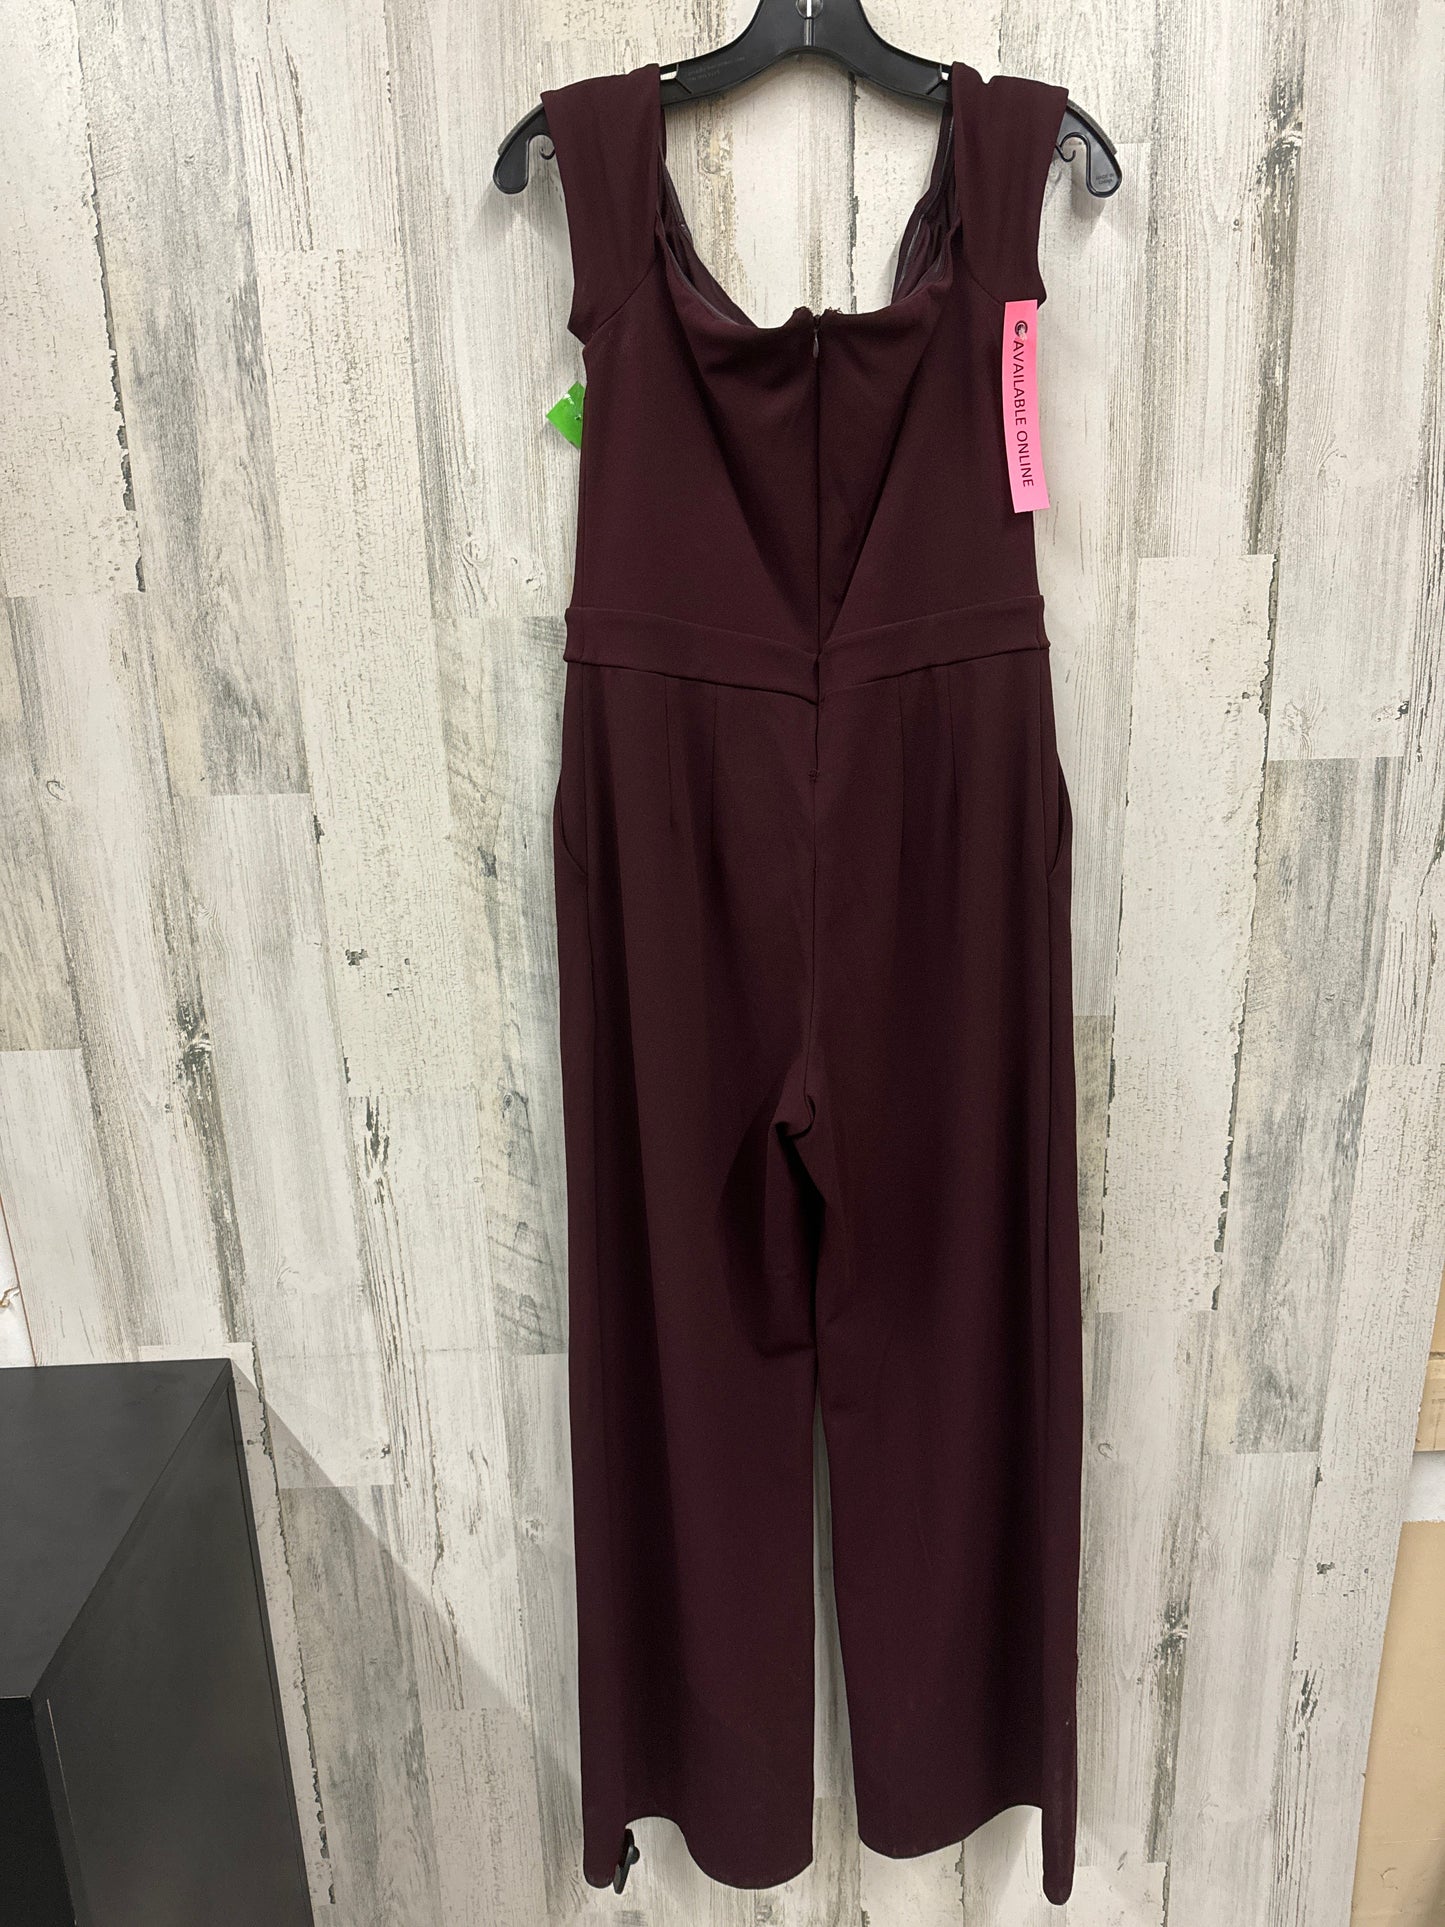 Jumpsuit By Express  Size: M